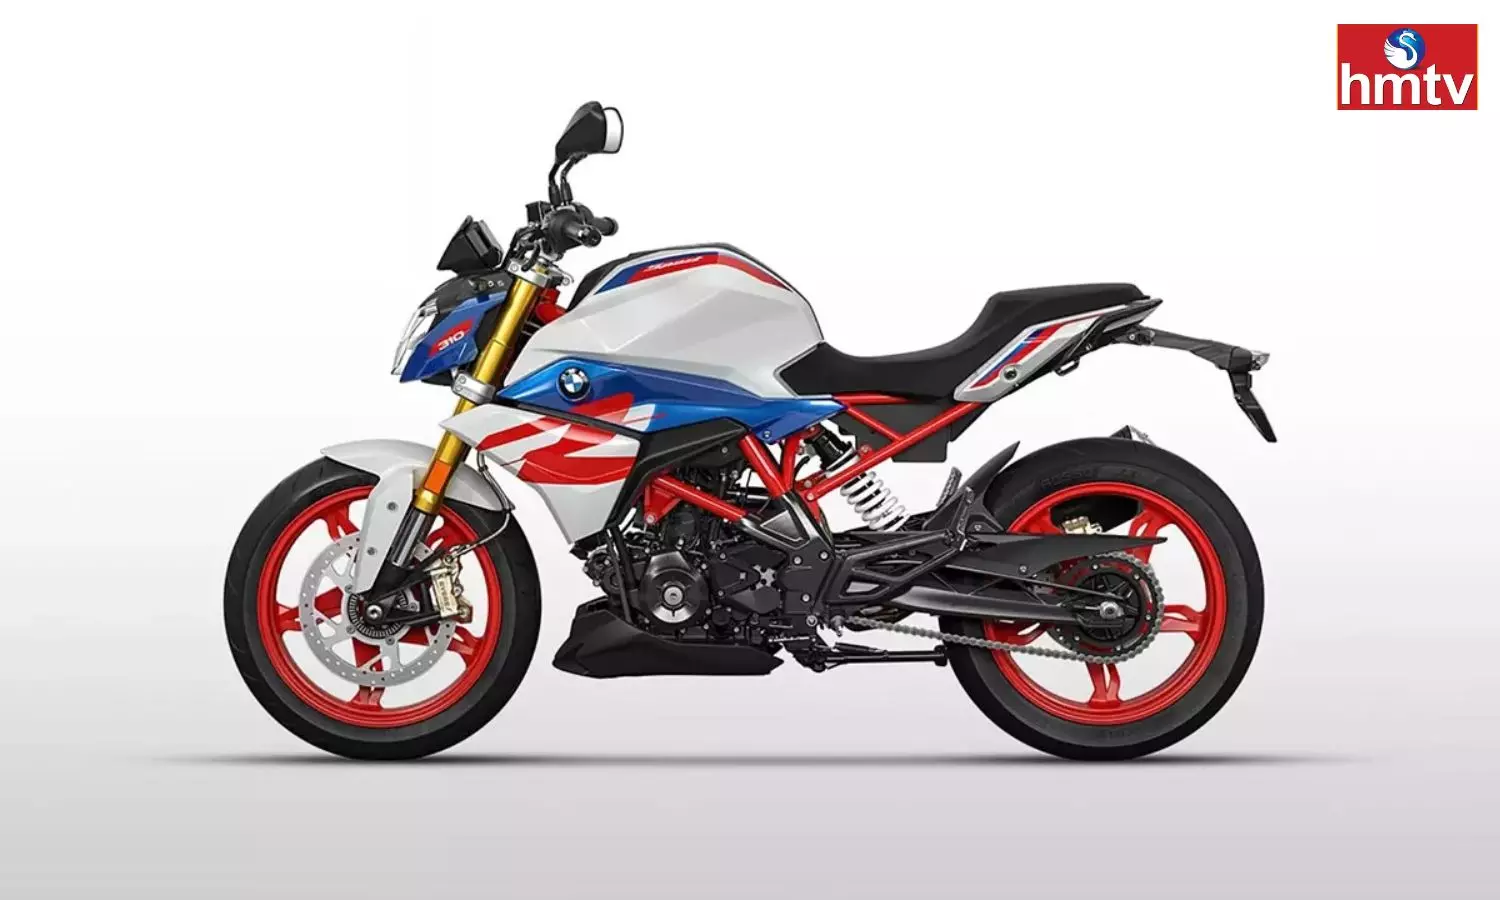 cheapest BMW bike called BMW g 310 r in India check price and features